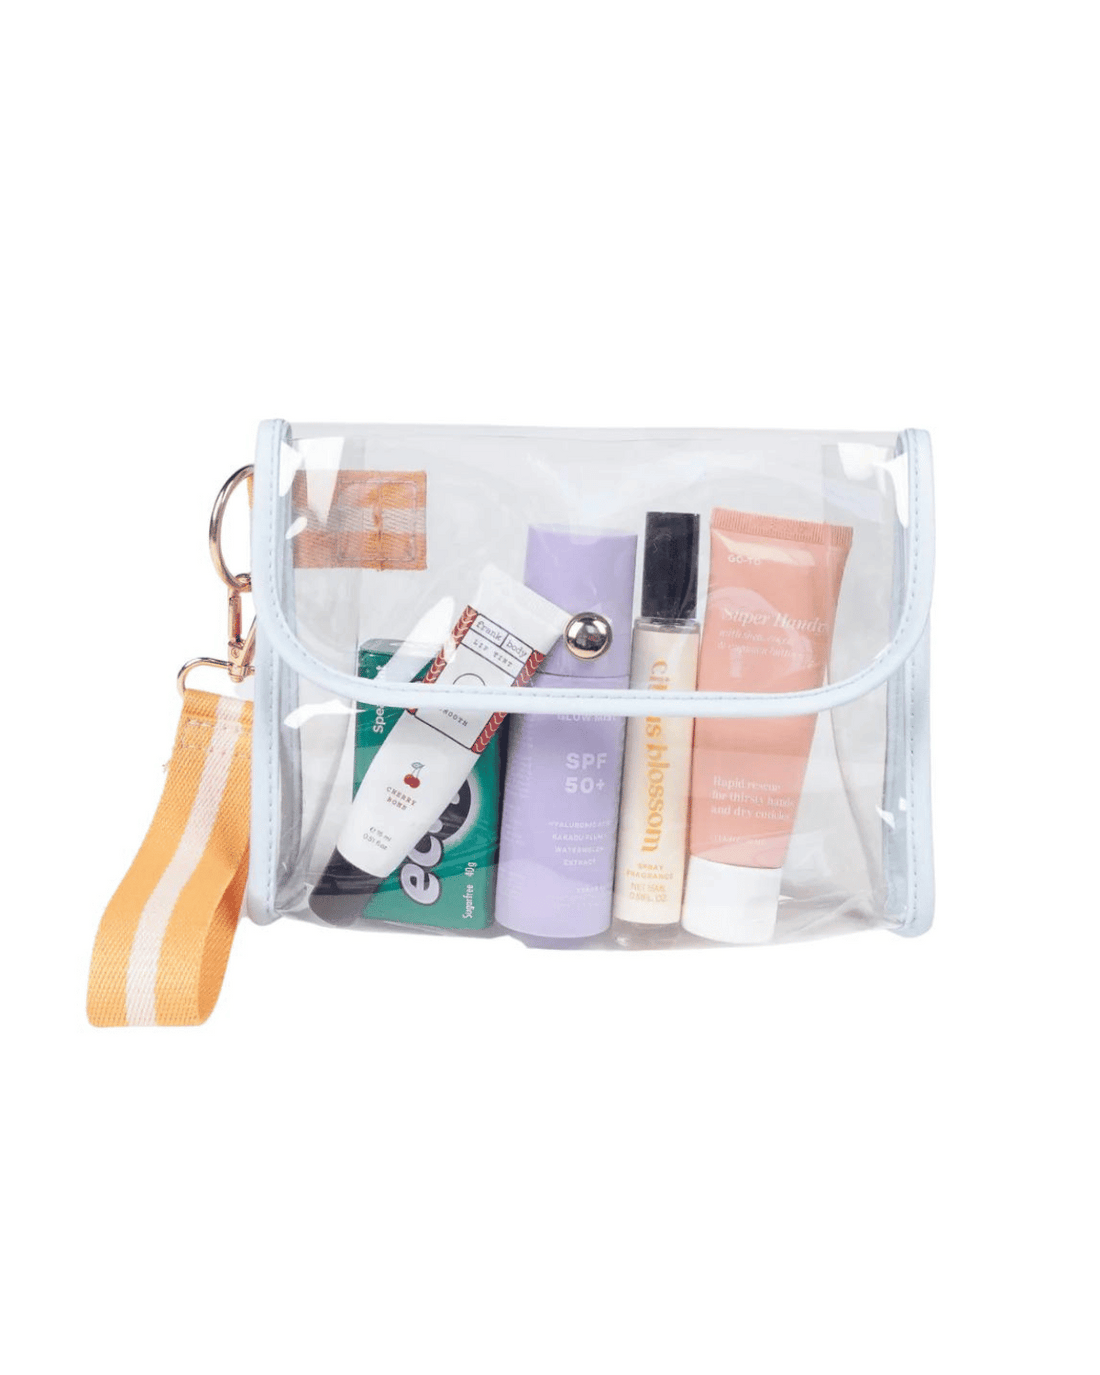 Clear Makeup Bag - Marshmallow Cheeky Traveller Bag by The Somewhere Co